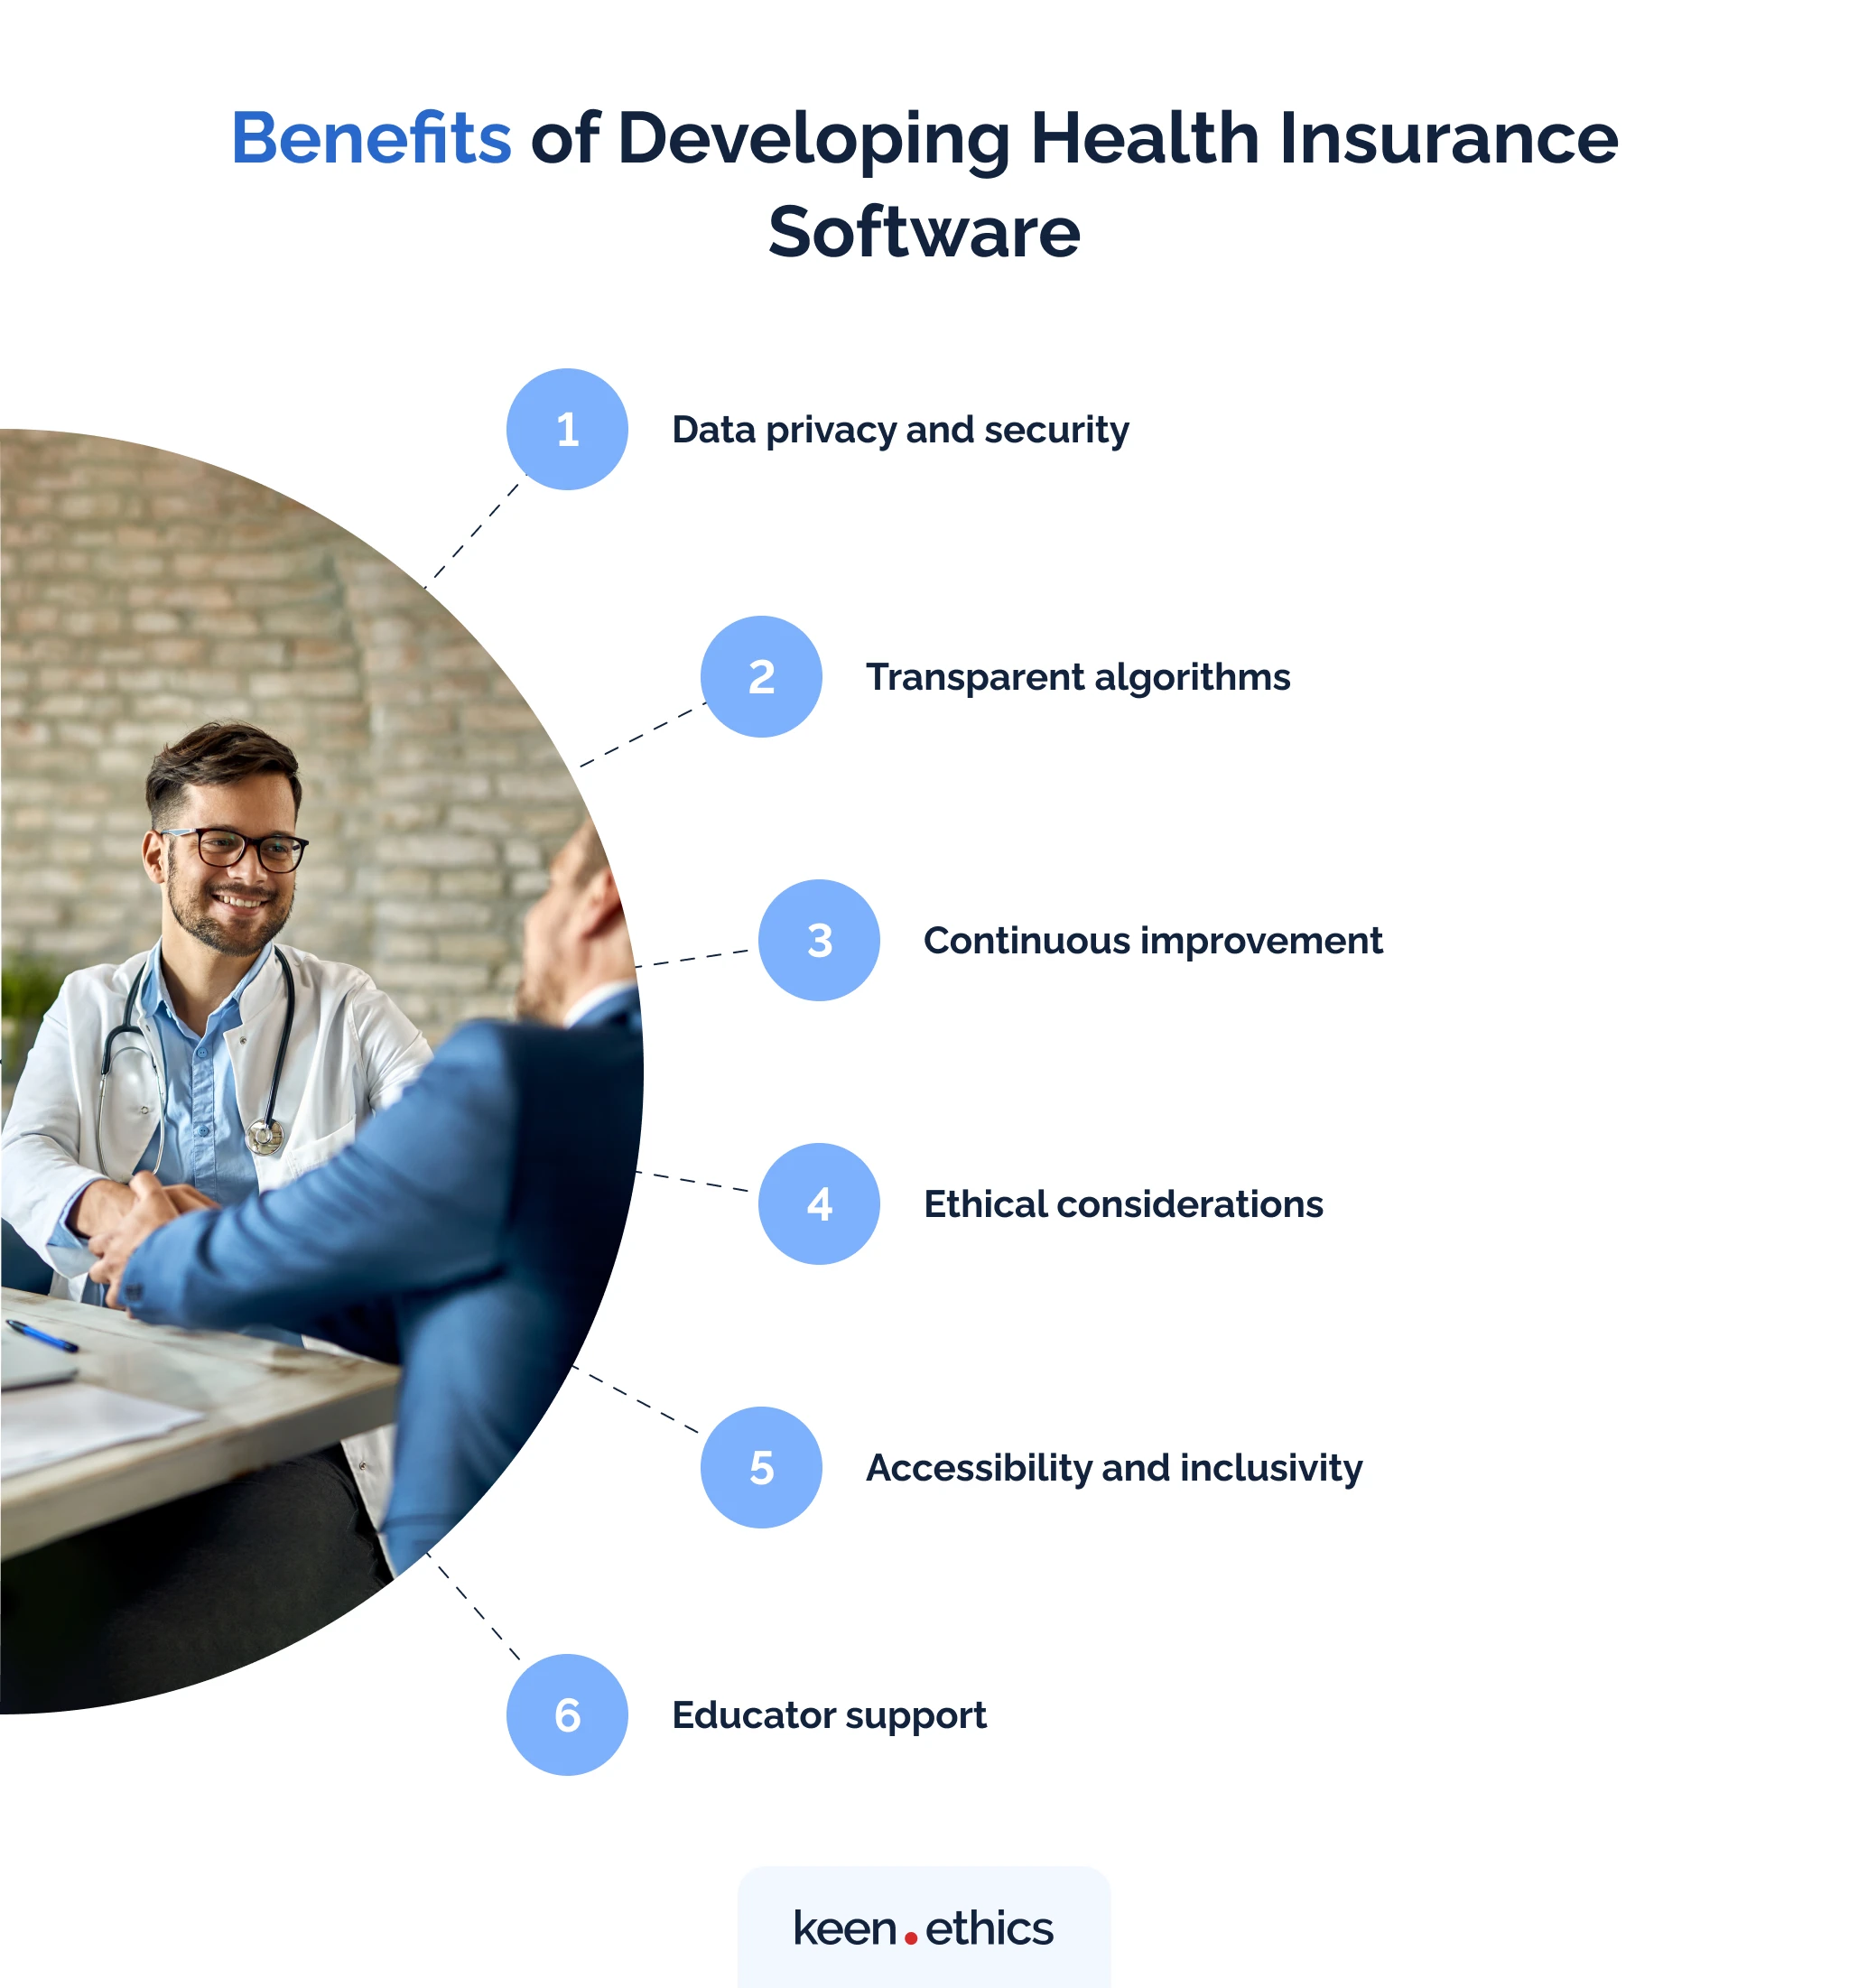 Benefits of developing health insurance software